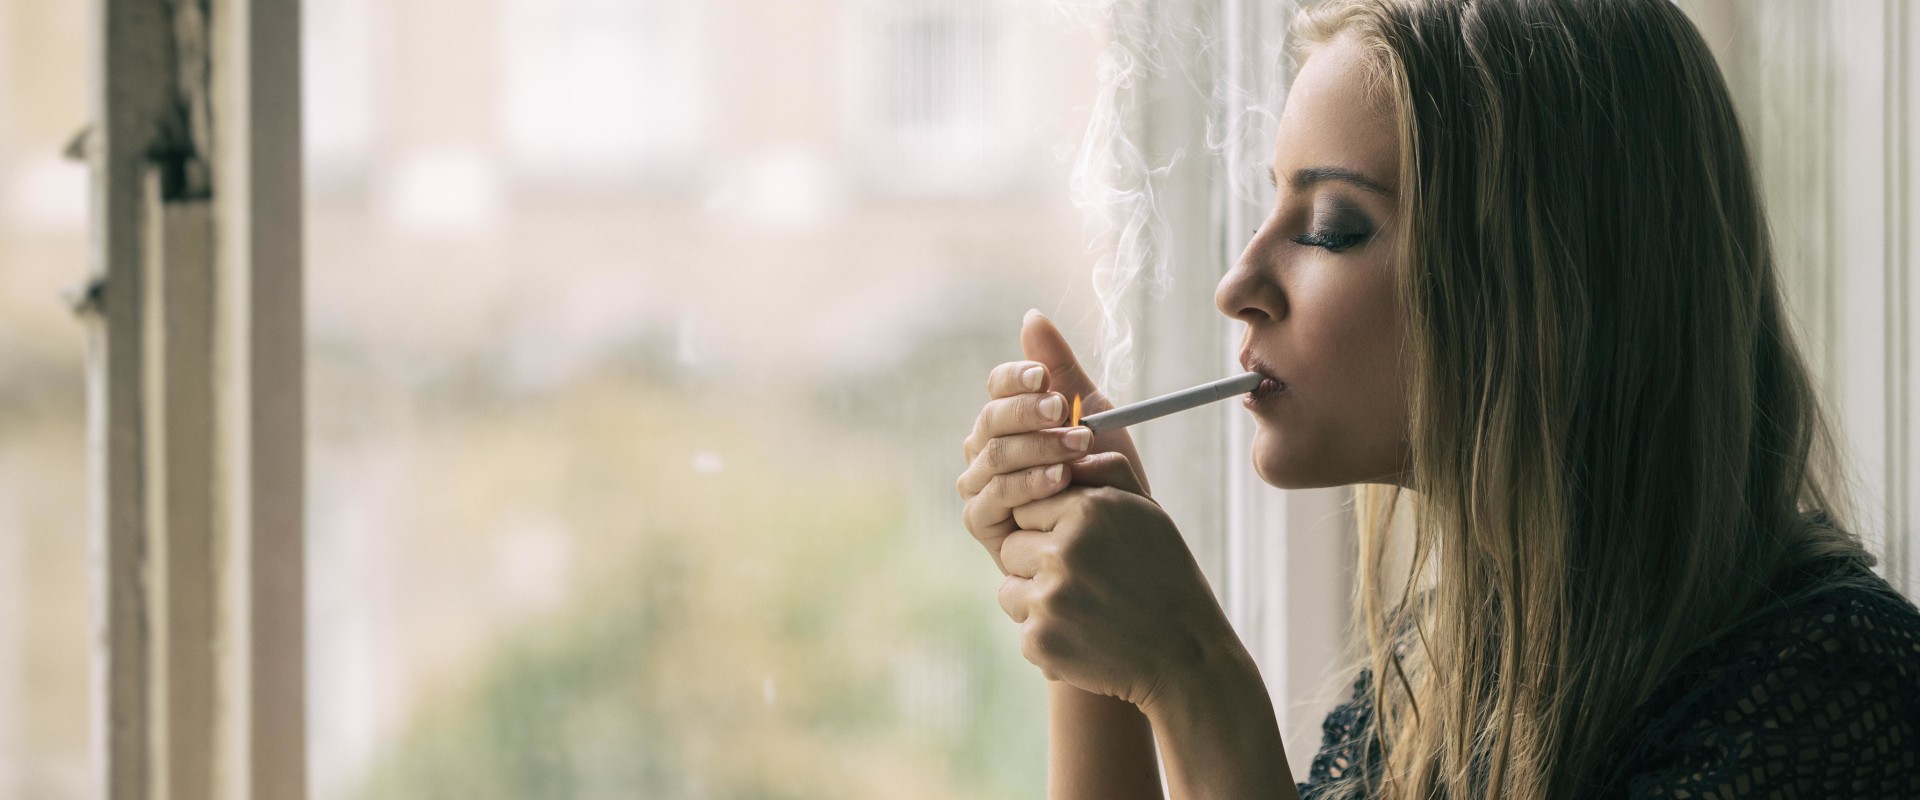 Do my lungs fully recover after quitting smoking?